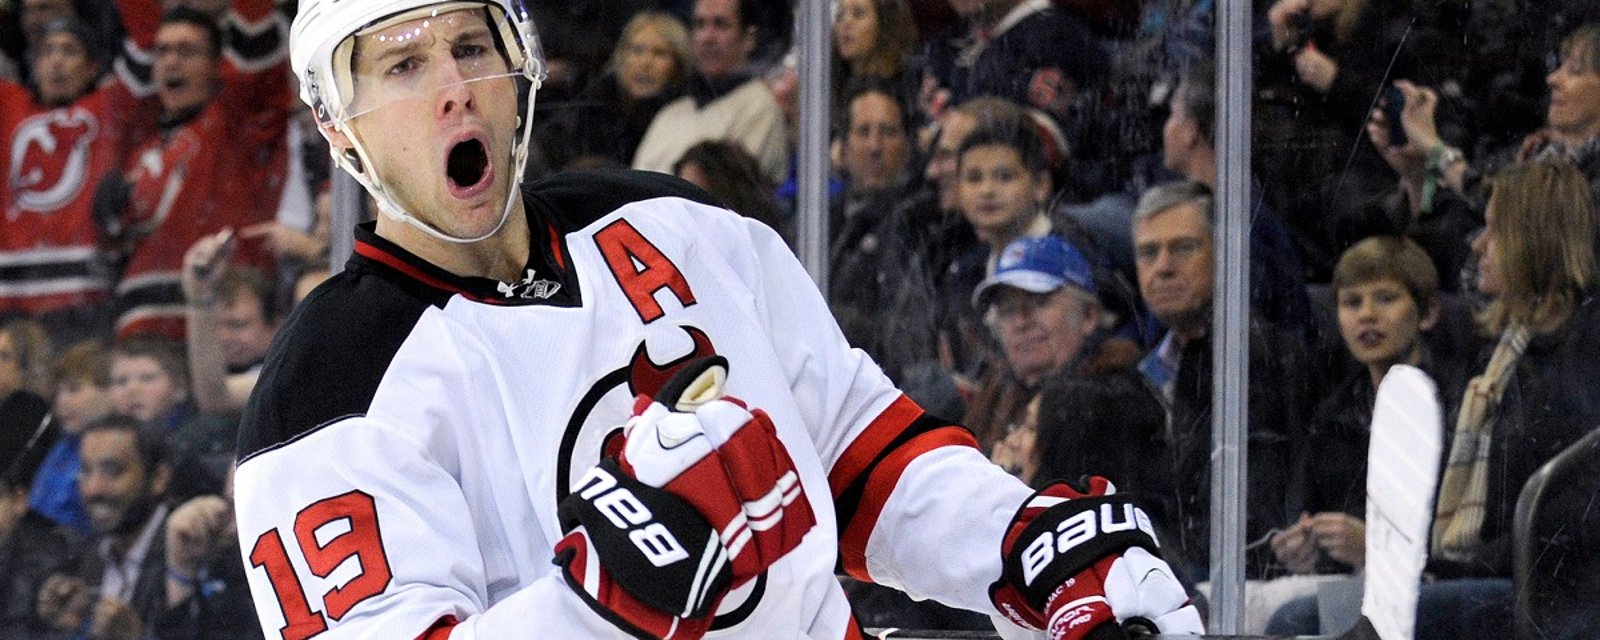 Travis Zajac announces retirement and the next step in his NHL career.